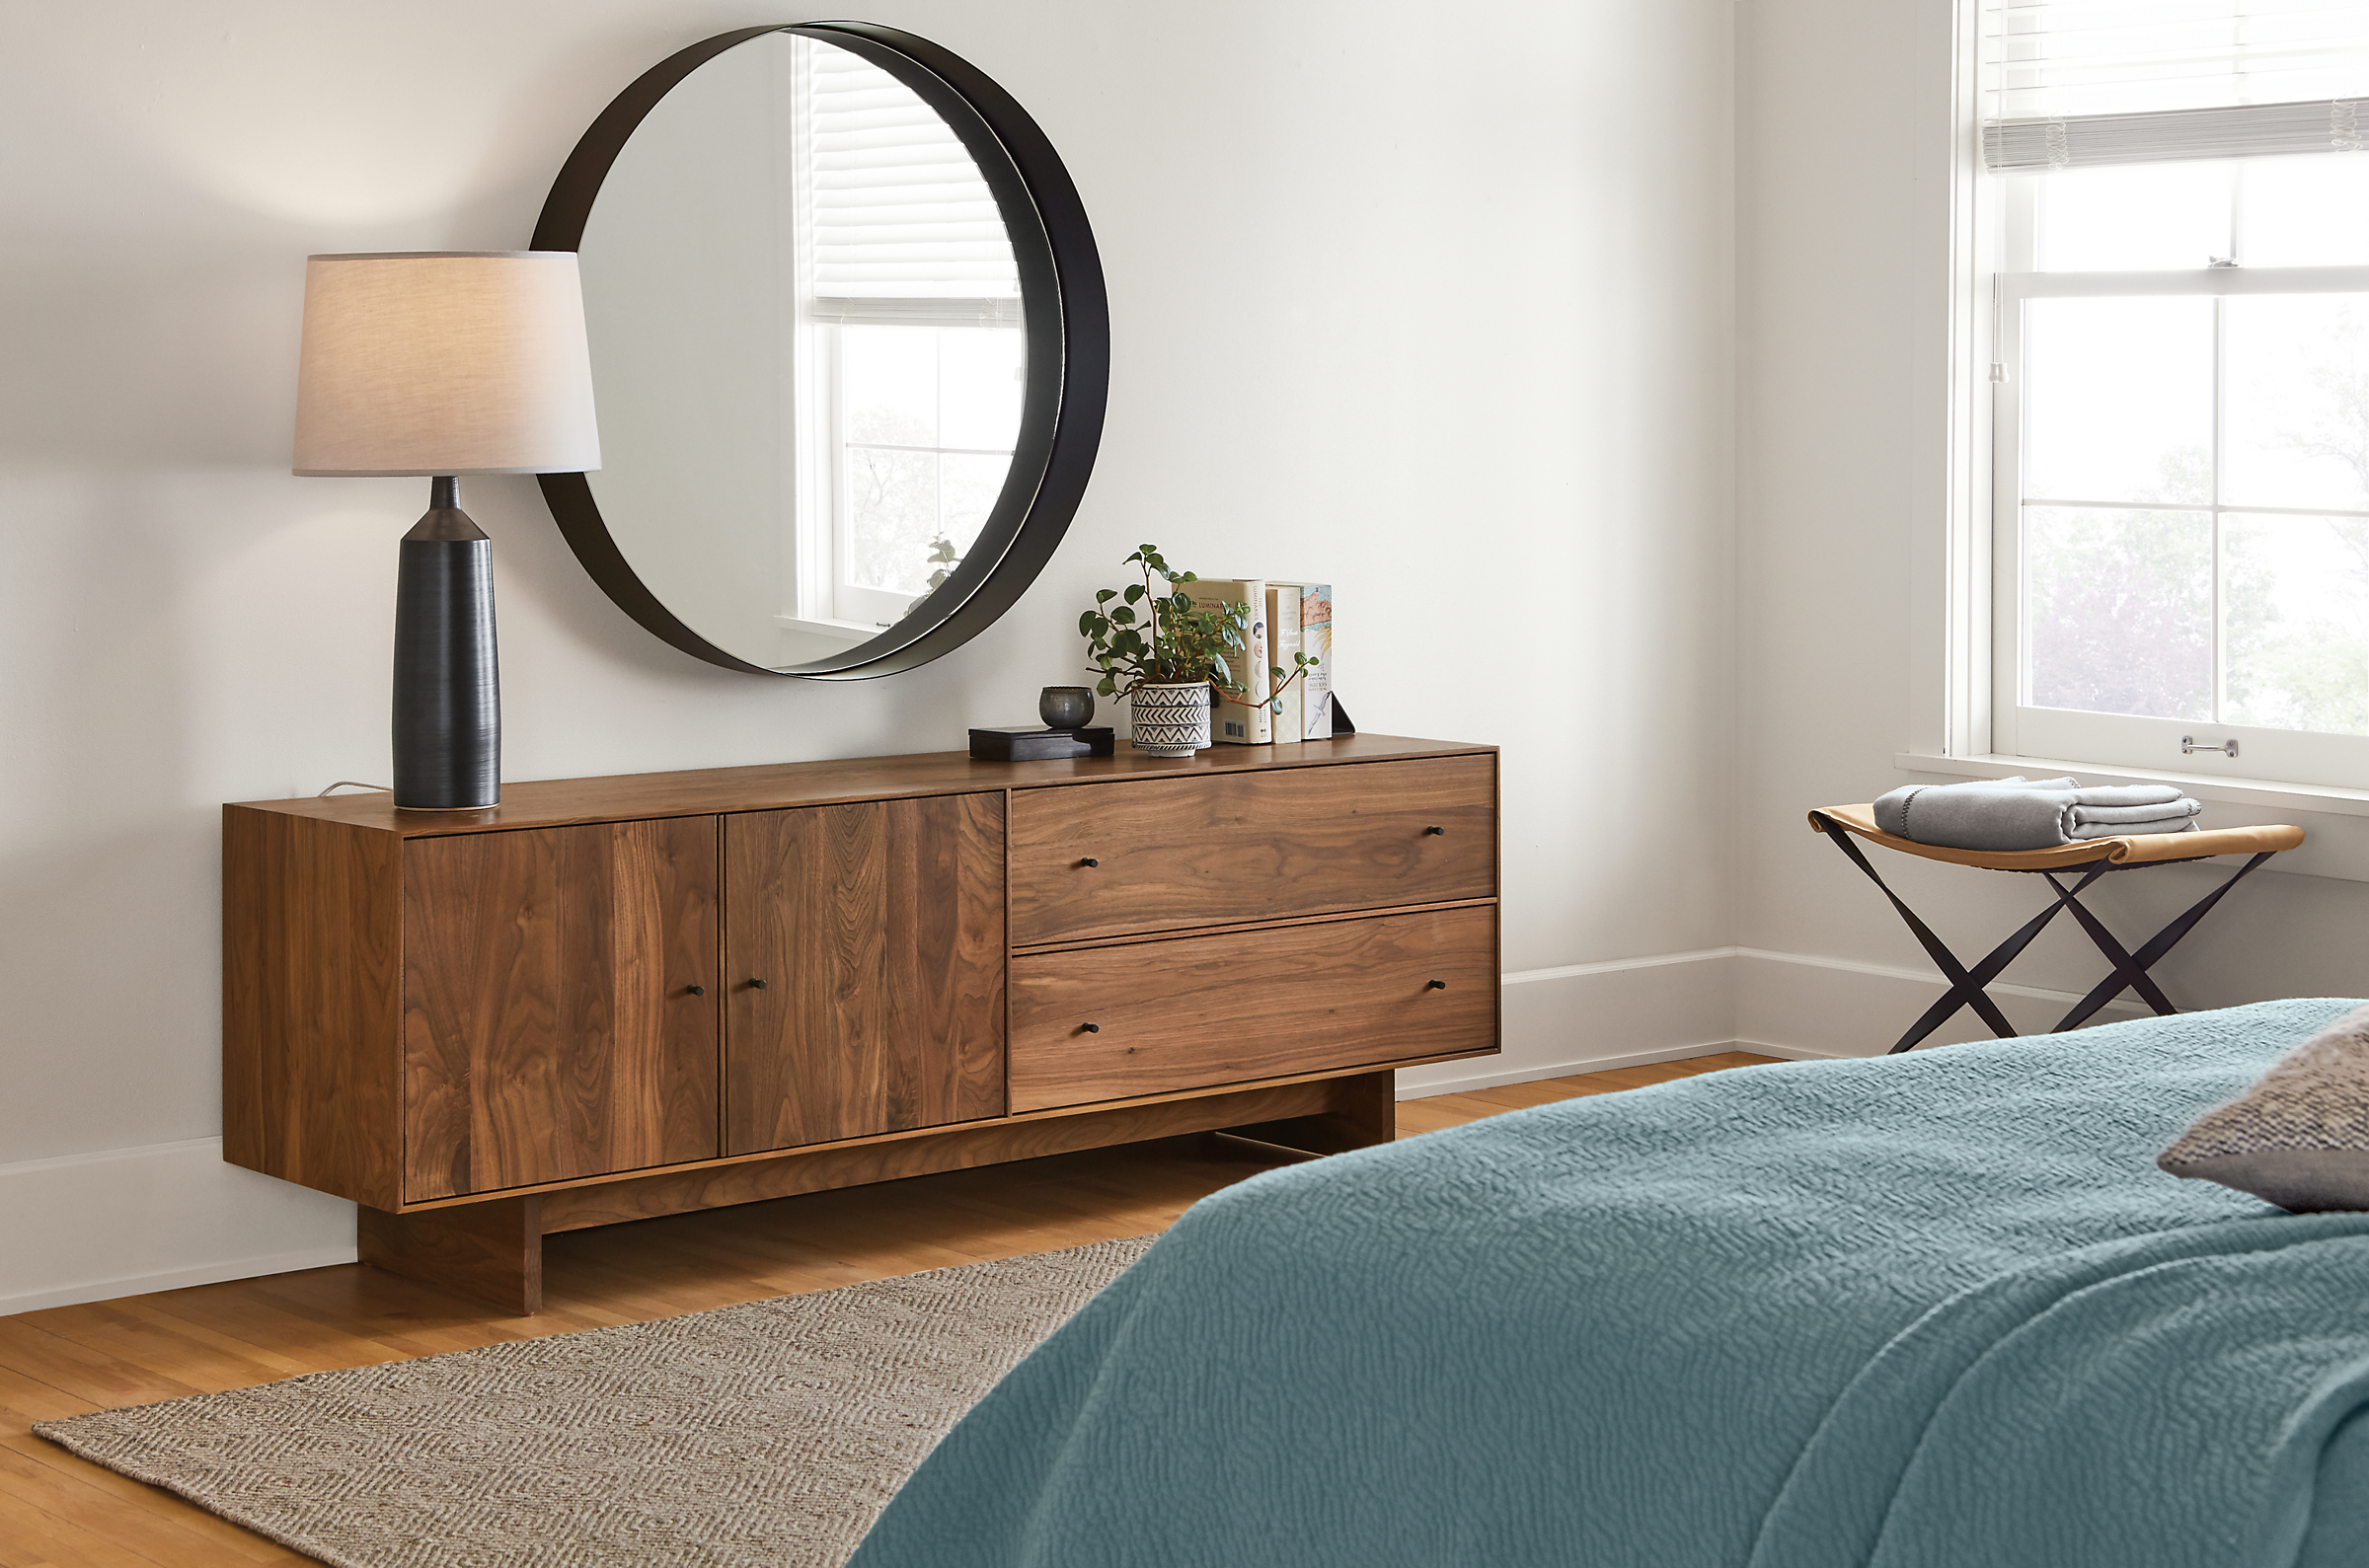 Detail of Hudson media cabinet with wood base in bedroom setting.